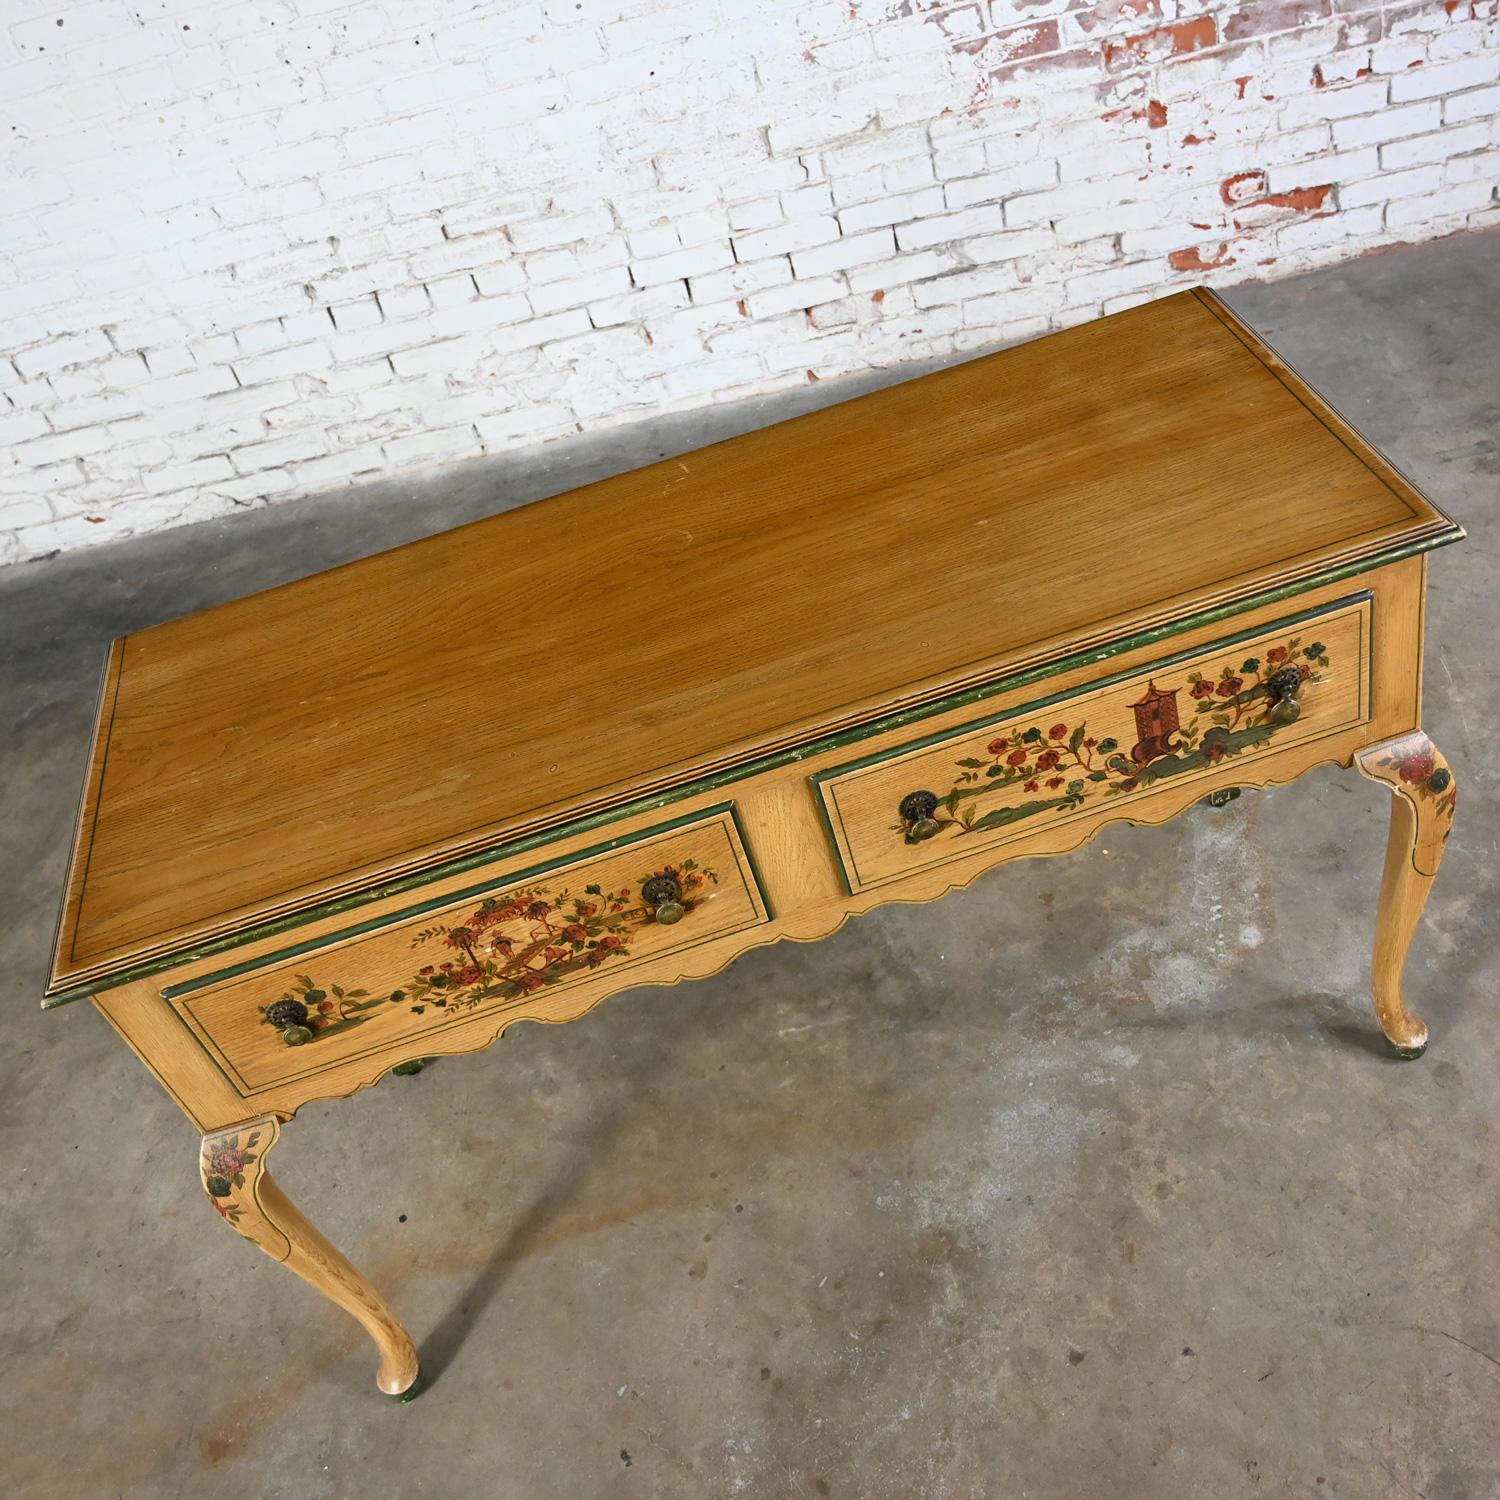 Antique Chinoiserie Hunt Style Buffet Sideboard Server Hand Painted Cabriole Leg In Good Condition For Sale In Topeka, KS